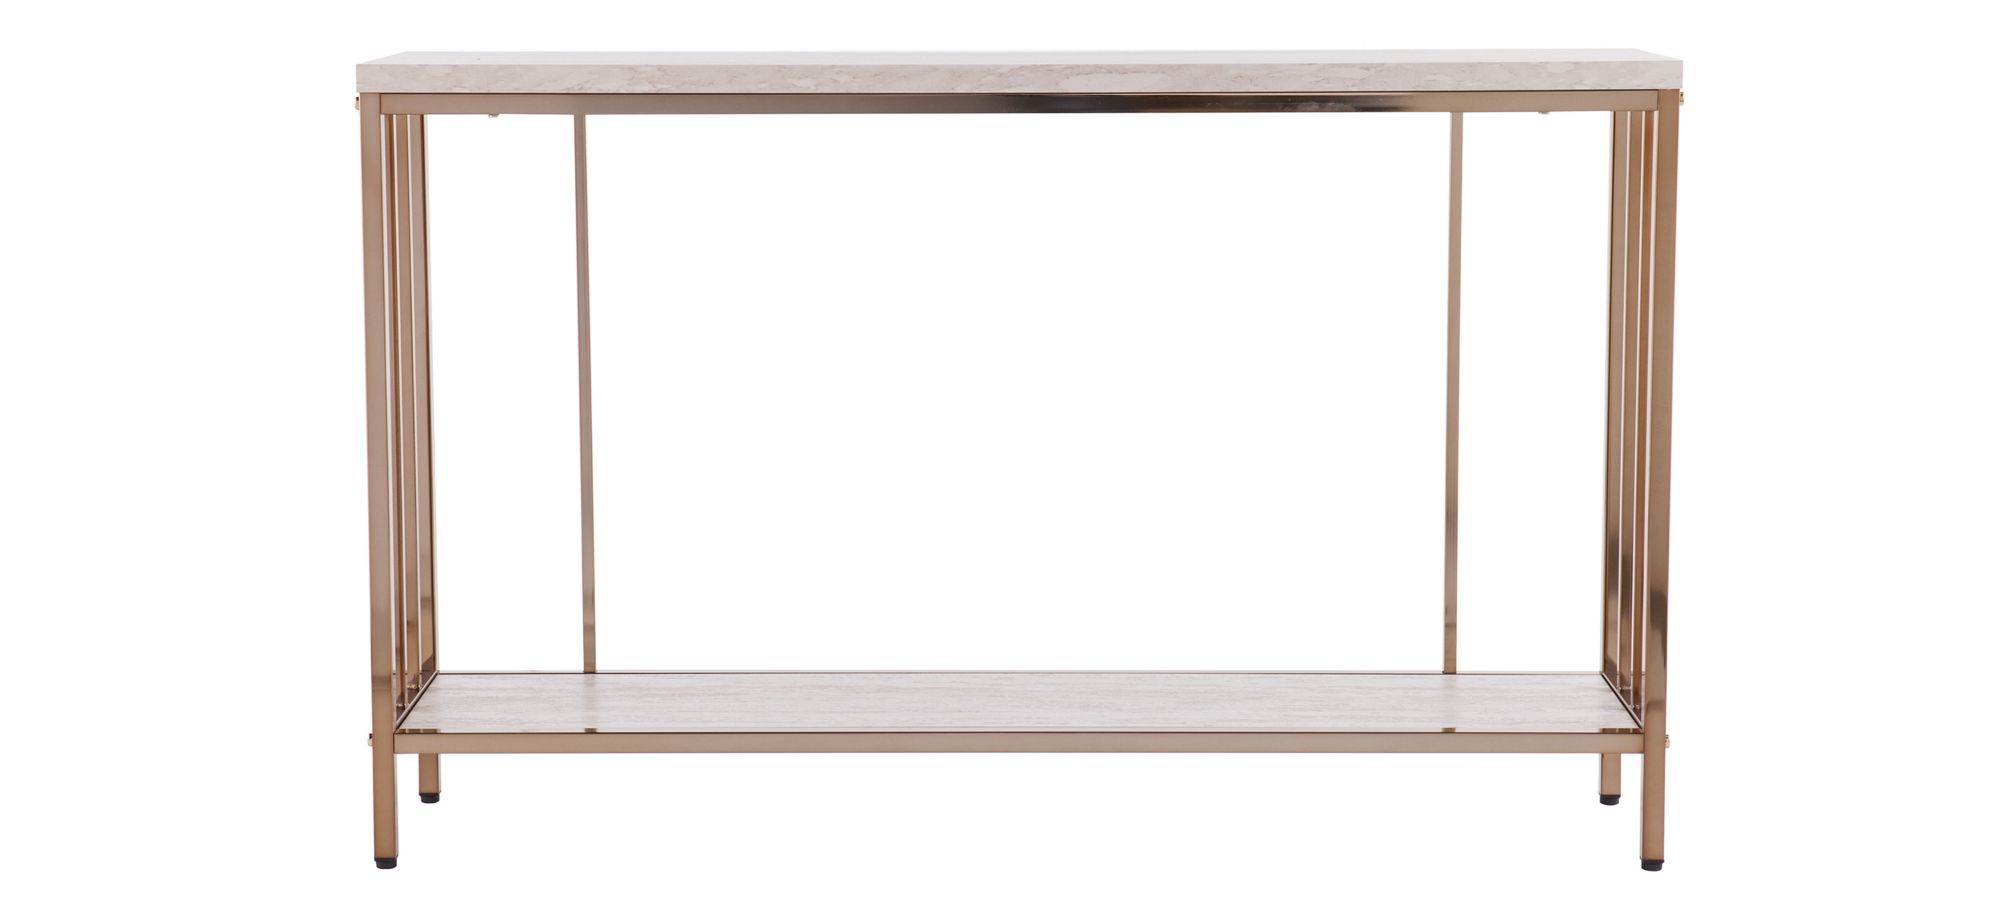 Hely Faux Marble Console Table in Champagne by SEI Furniture